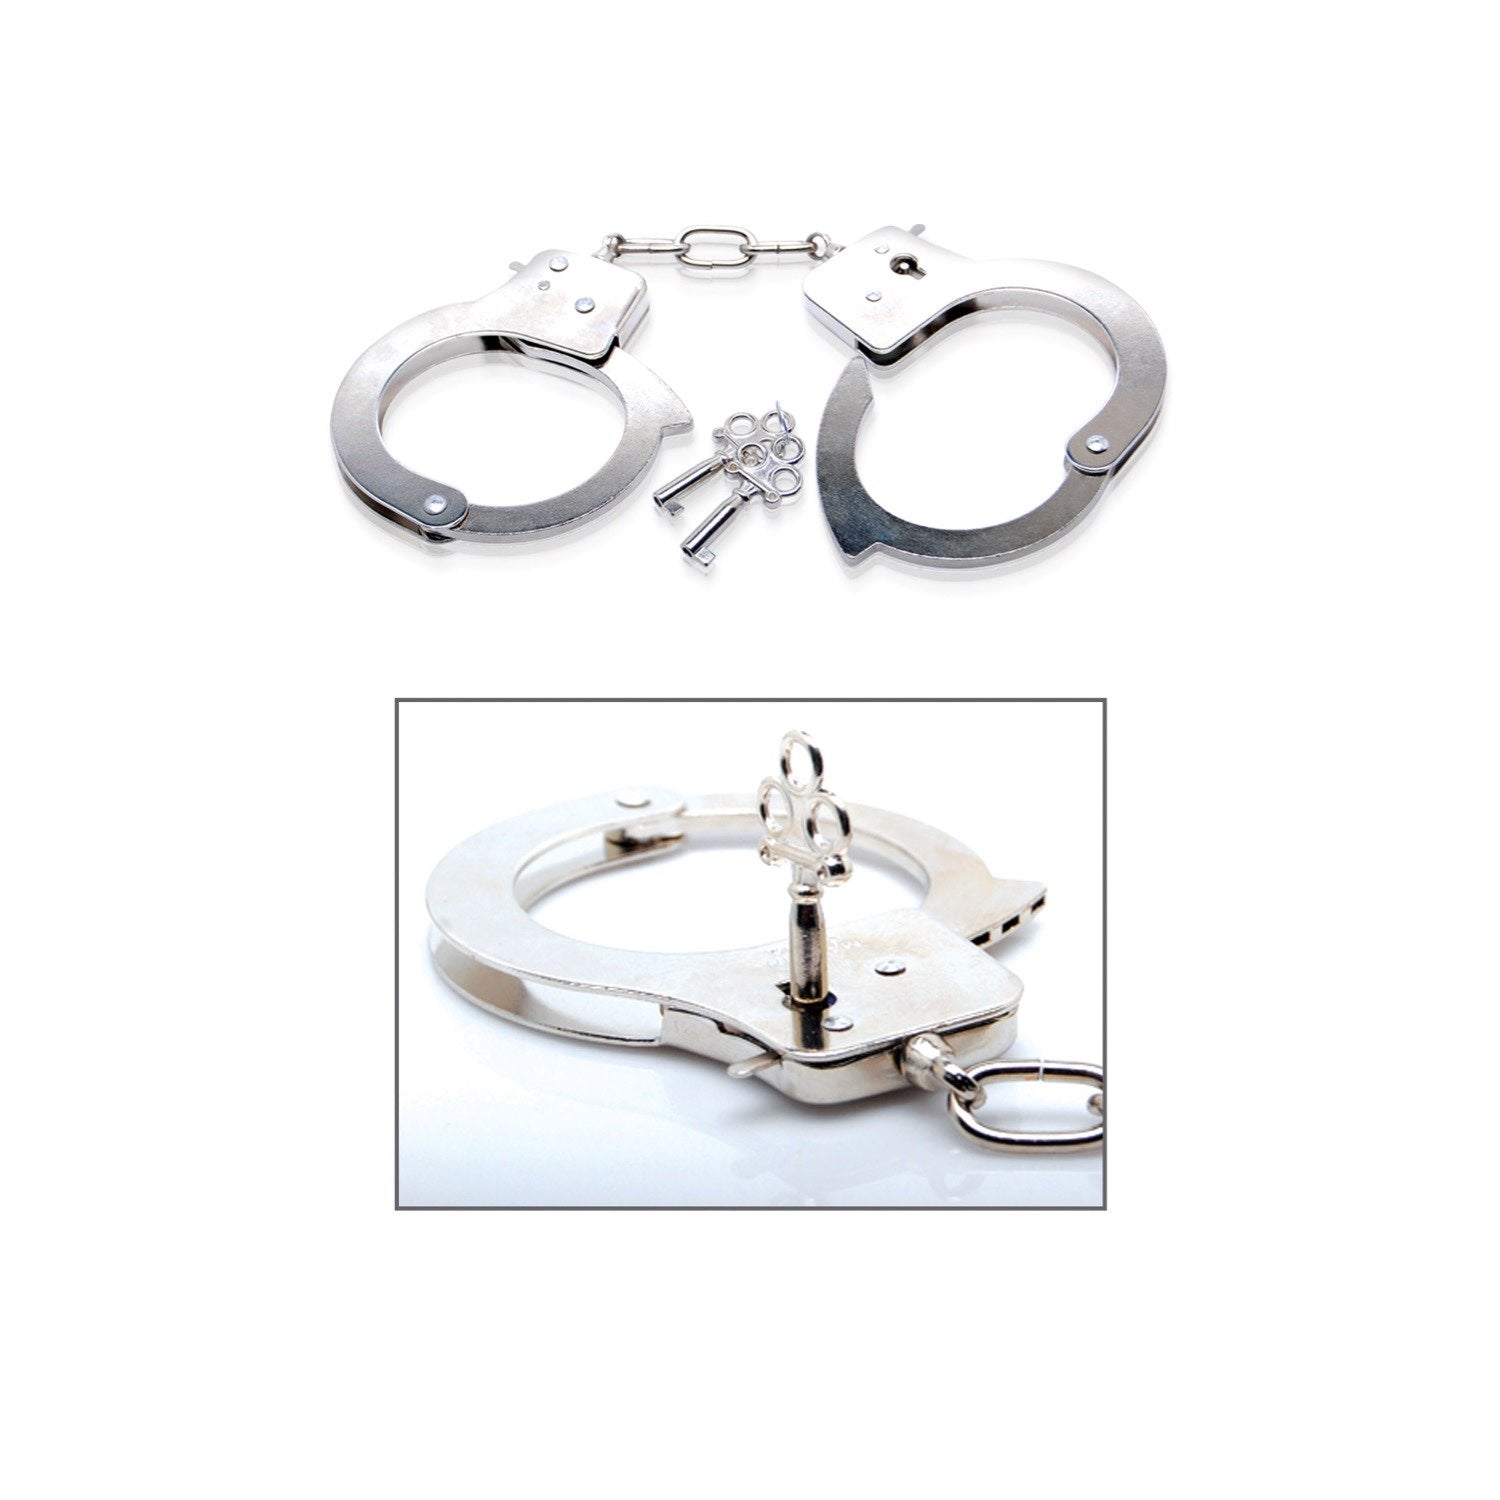 Fetish Fantasy Series Limited Edition Metal Handcuffs - Metal Handcuffs by Pipedream